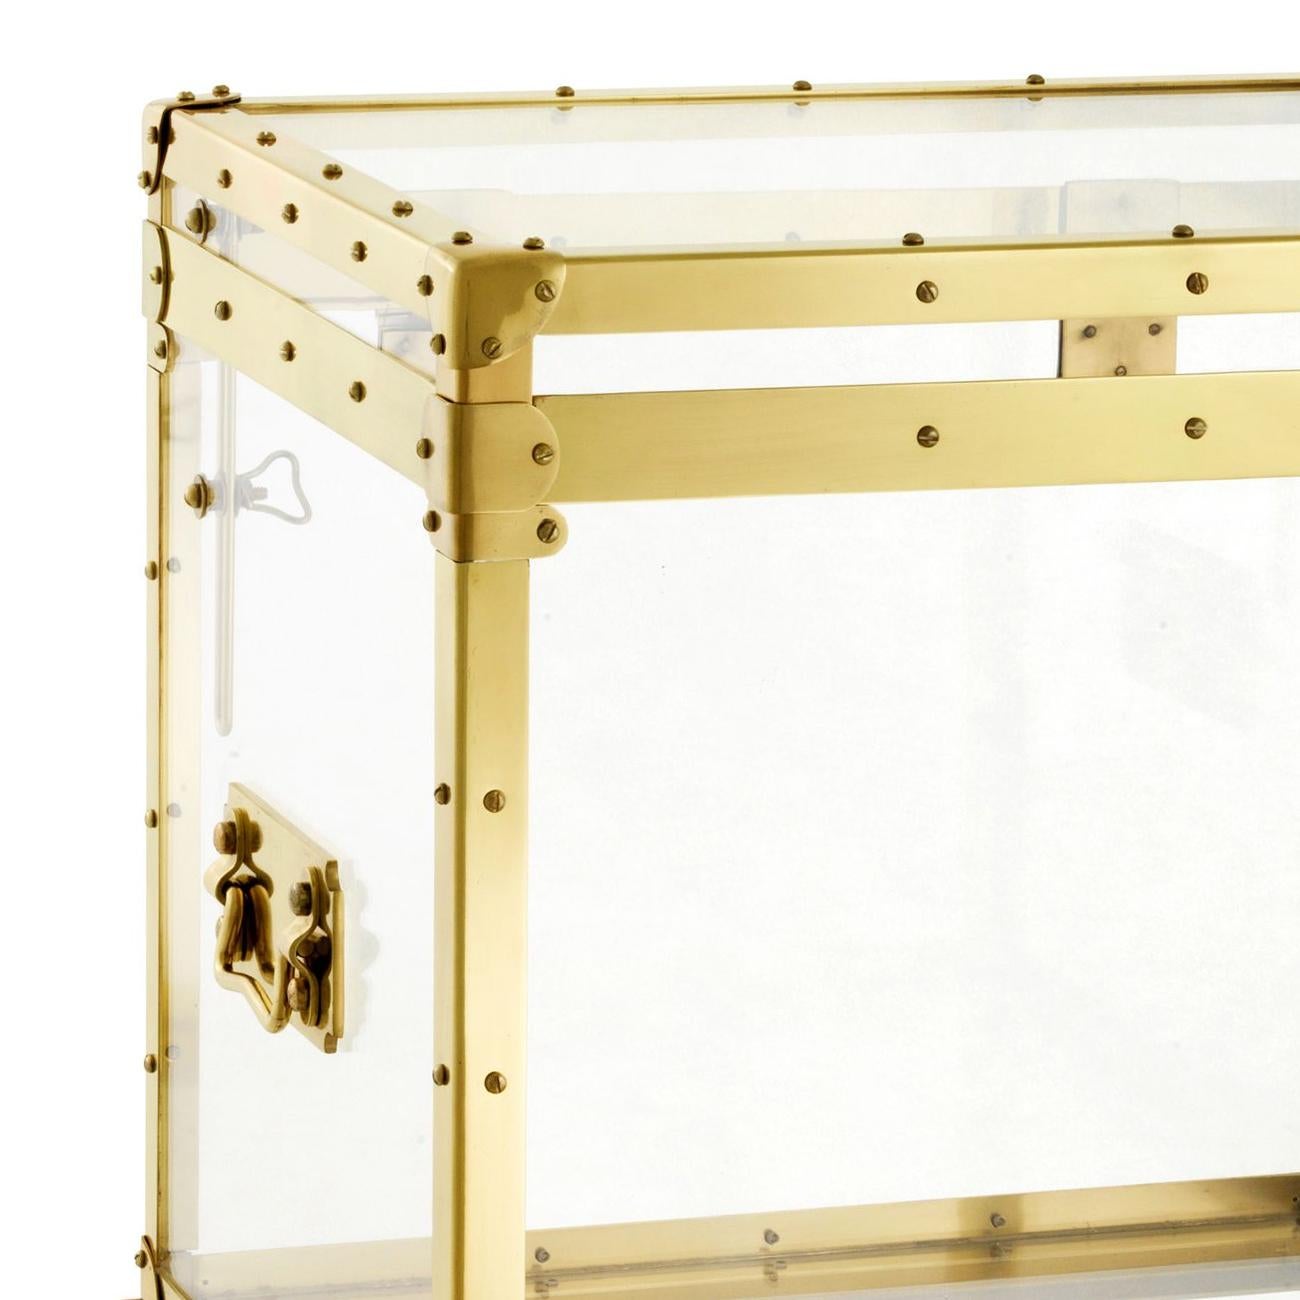 Case flight gold with stainless steel and aluminium frame
in gold finish, with clear acrylic faces and up and down clear
acrylic tops. Gold finish square base stand included.